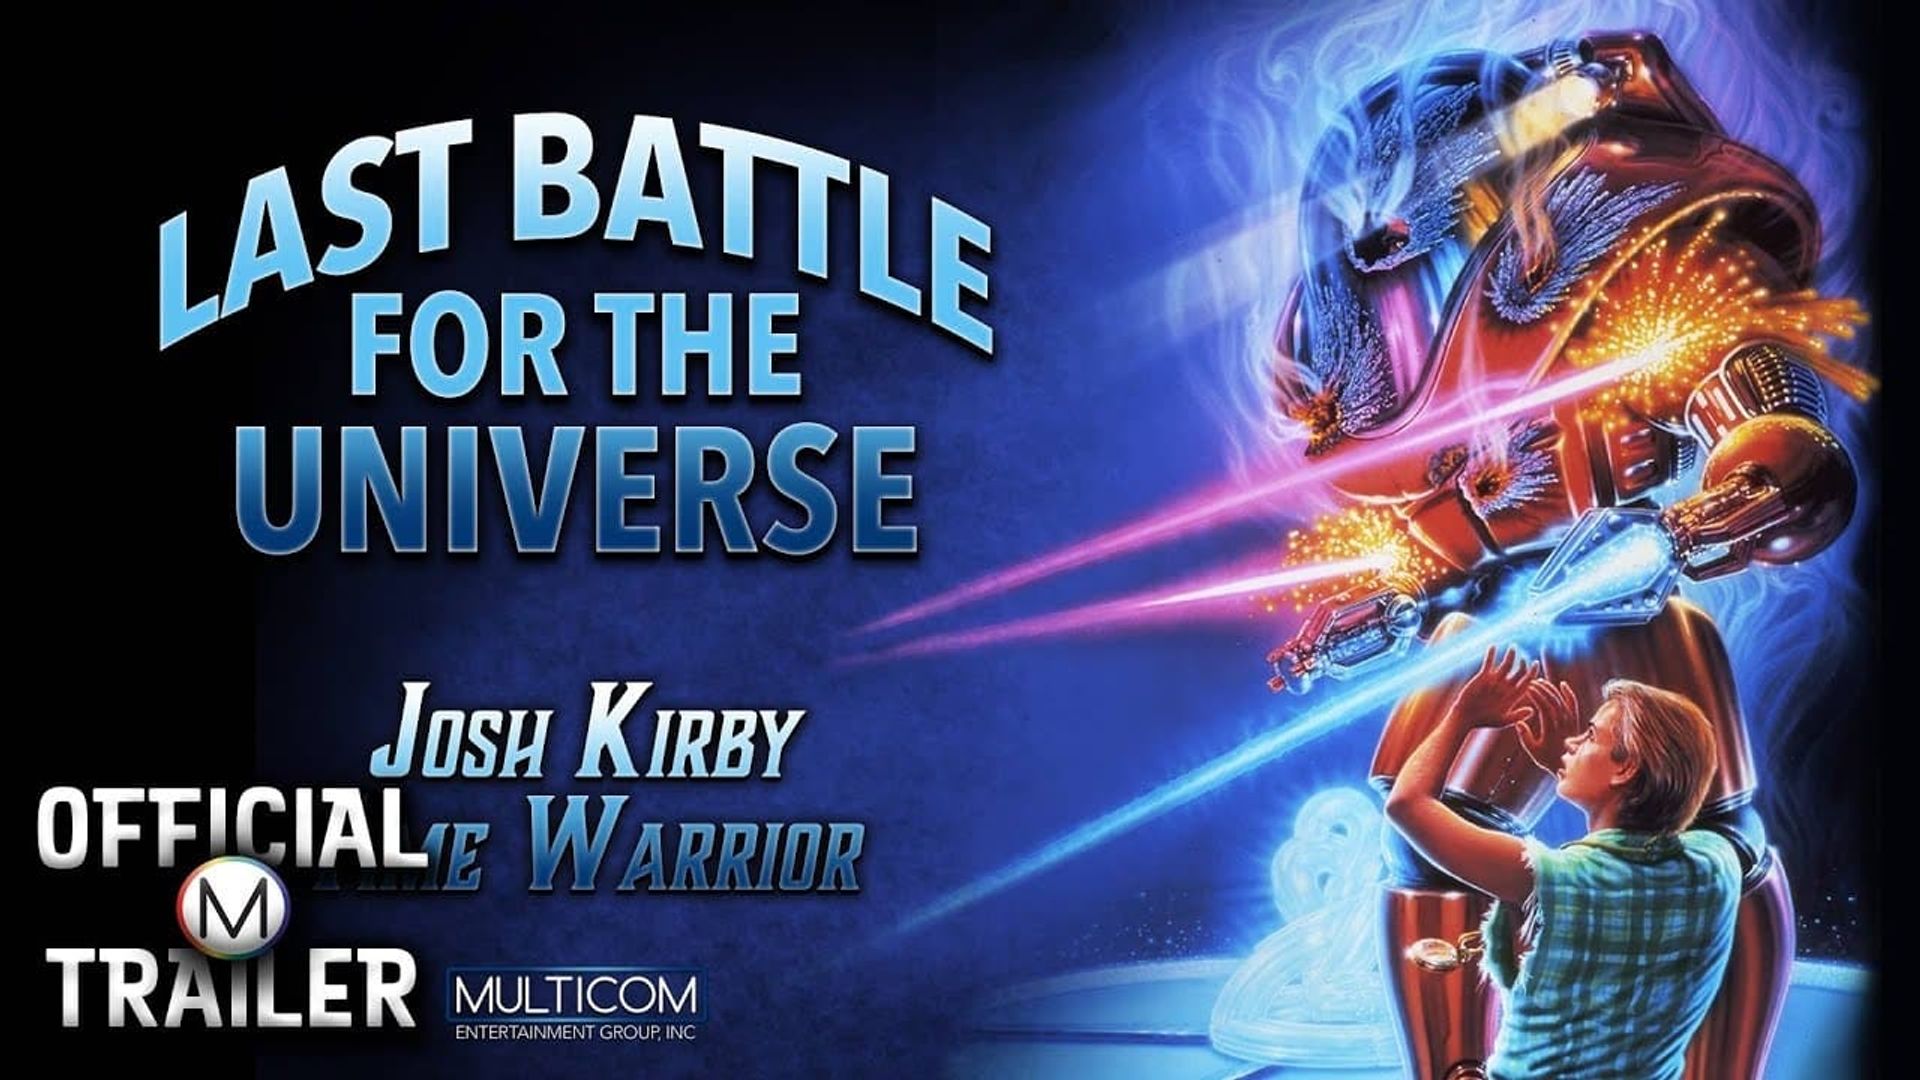 Josh Kirby: Time Warrior! Chap. 6: Last Battle for the Universe background